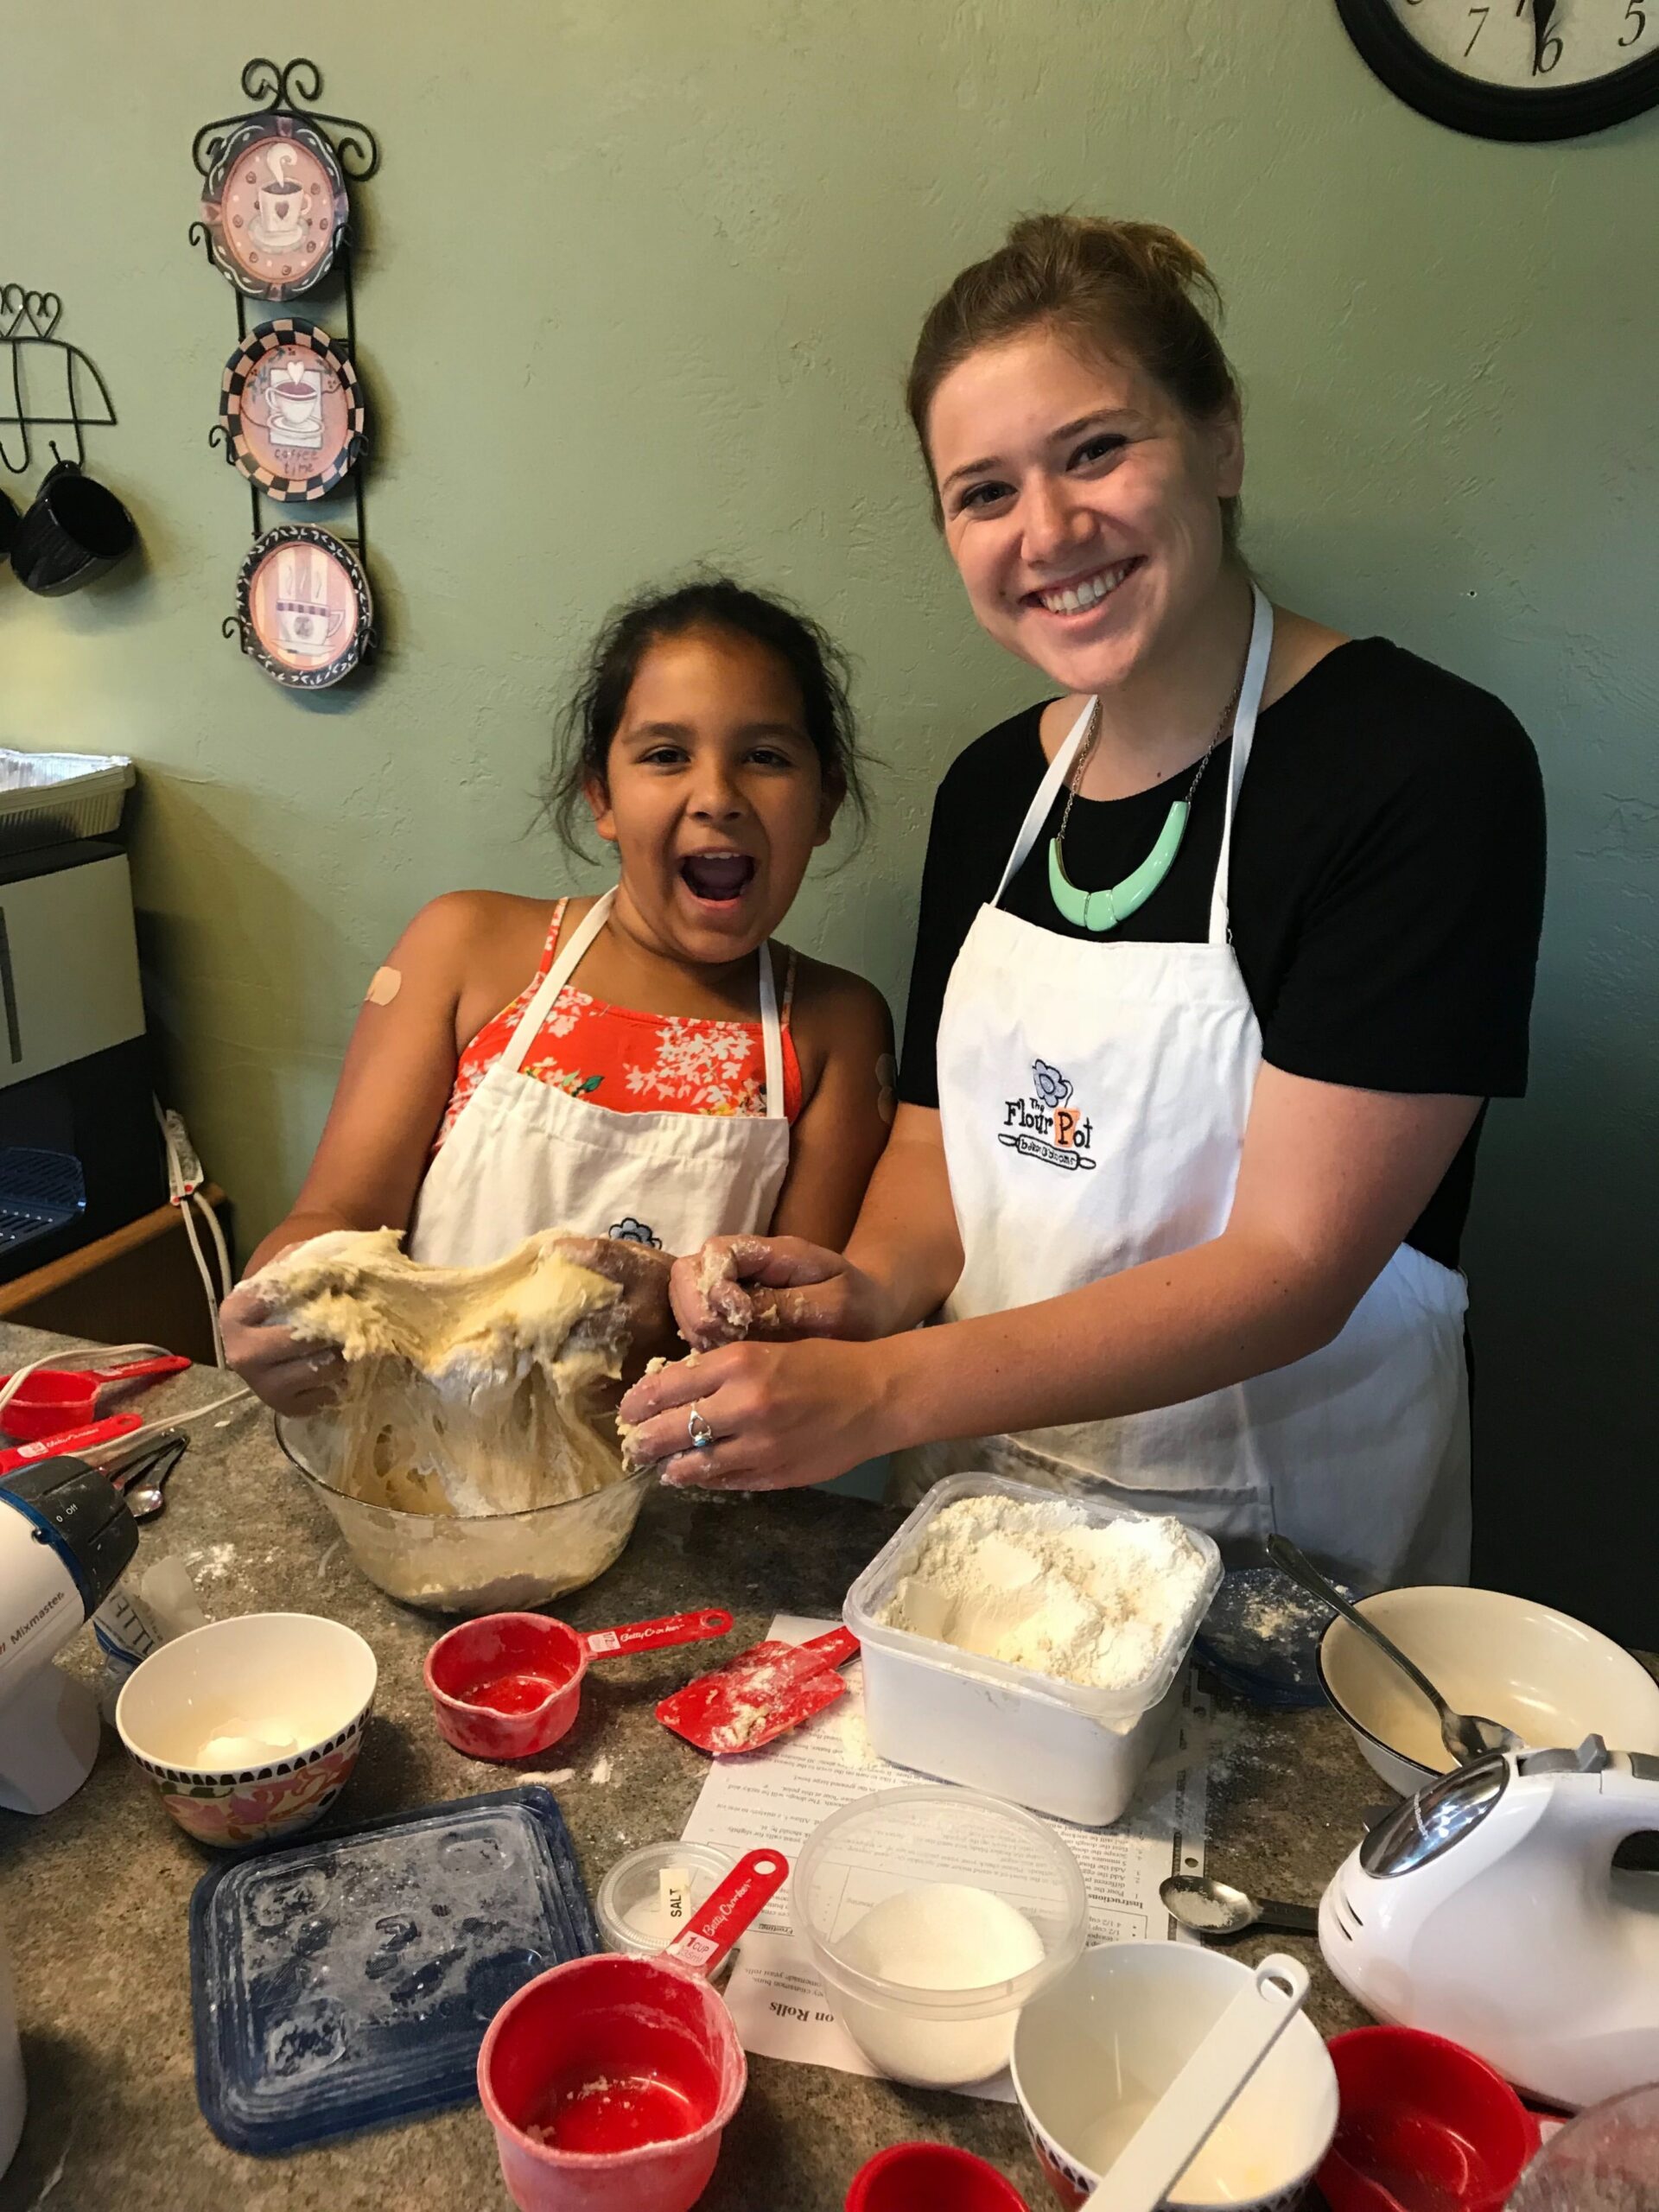 Big Katie Hermsen and her Little Angelina pose with dough while baking